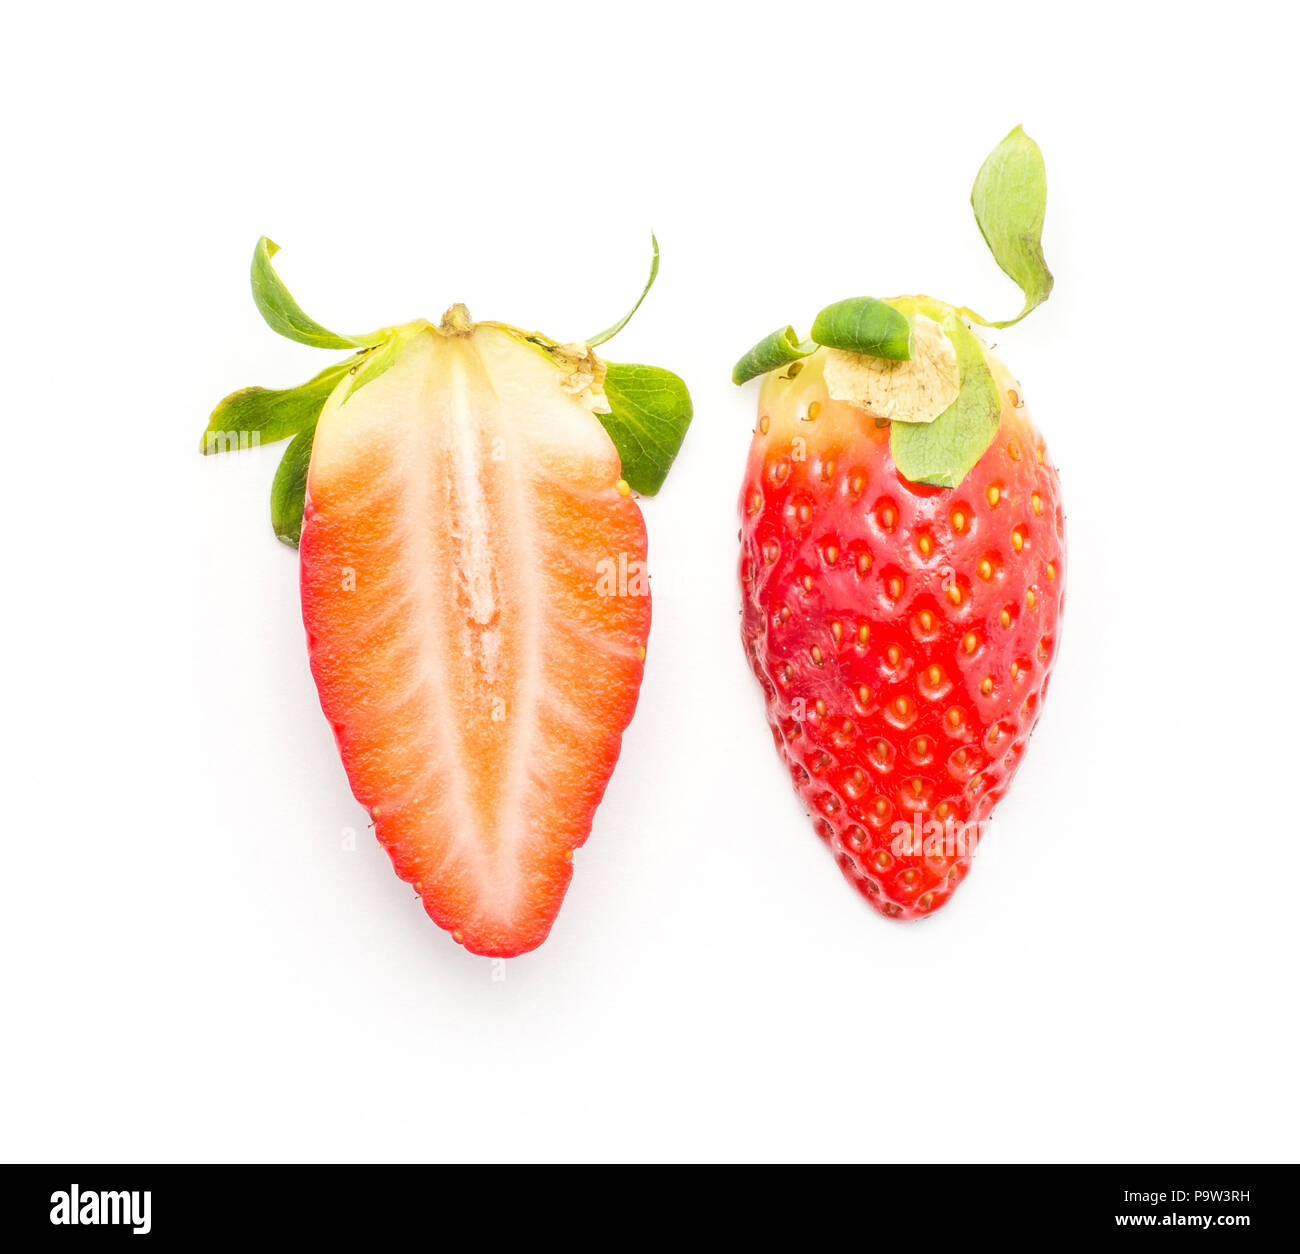 Garden strawberry top view one whole and one cross section half compare isolated on white background Stock Photo